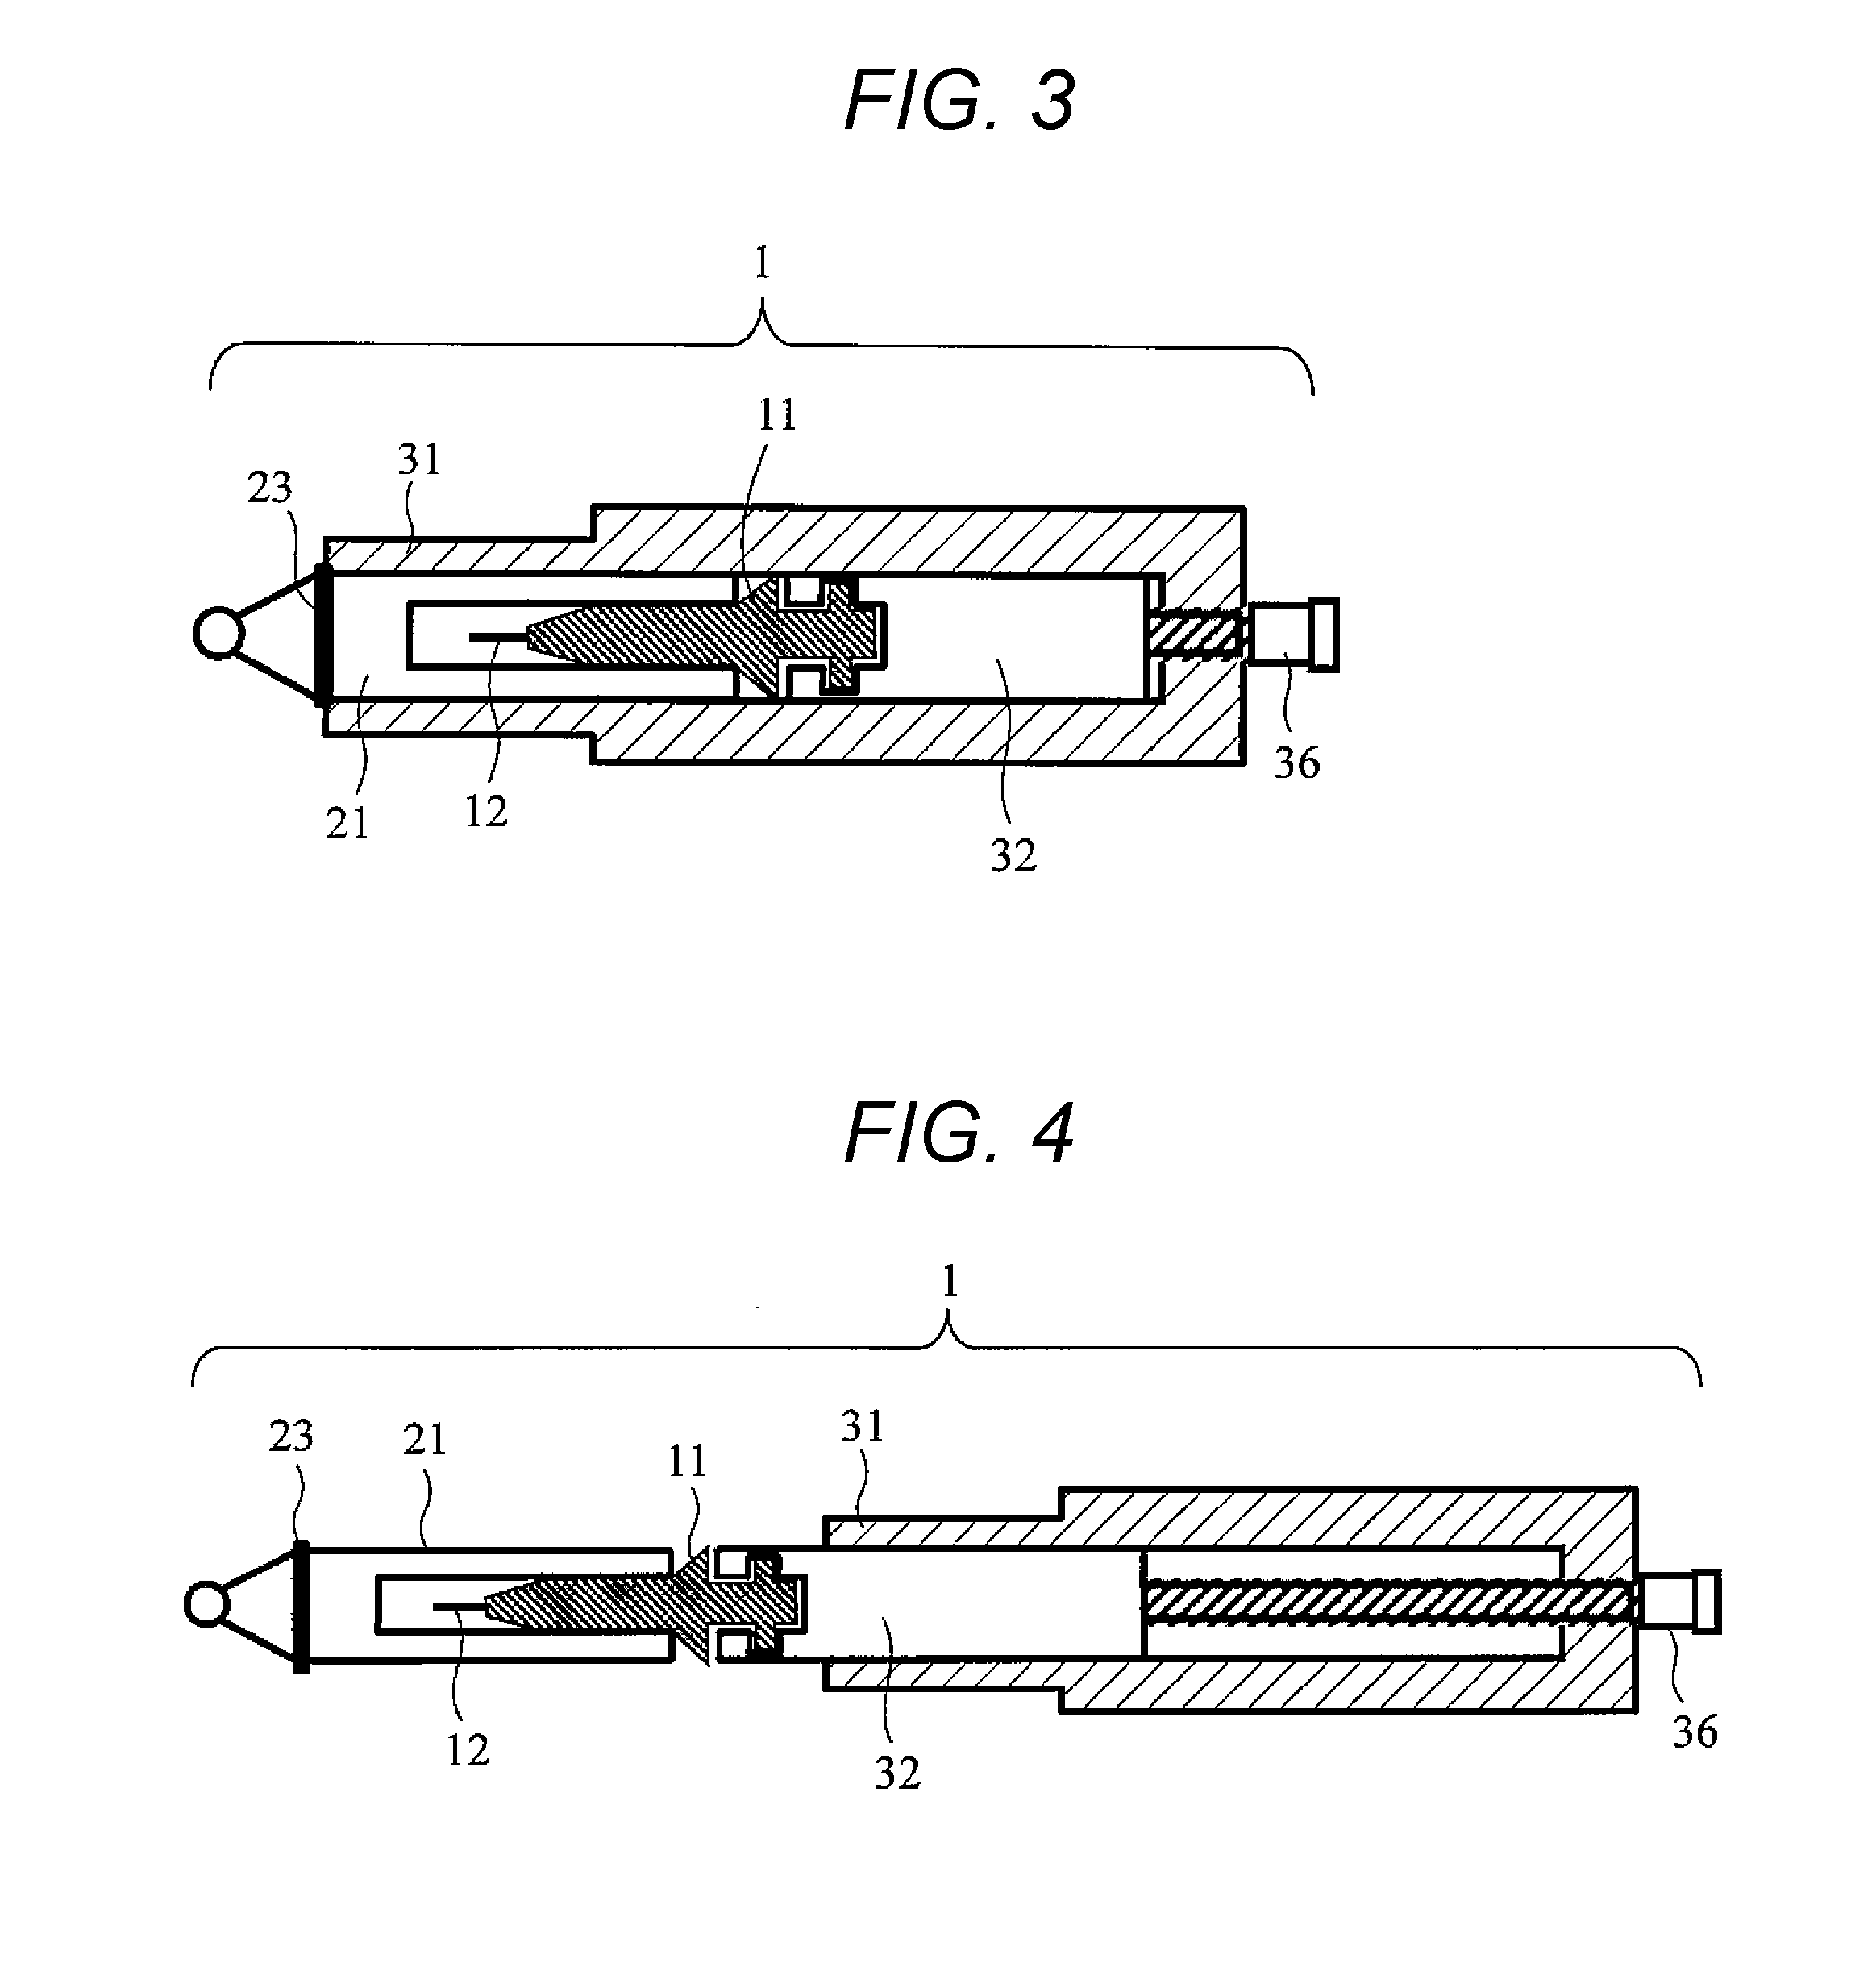 Sample holder and analytical vacuum device